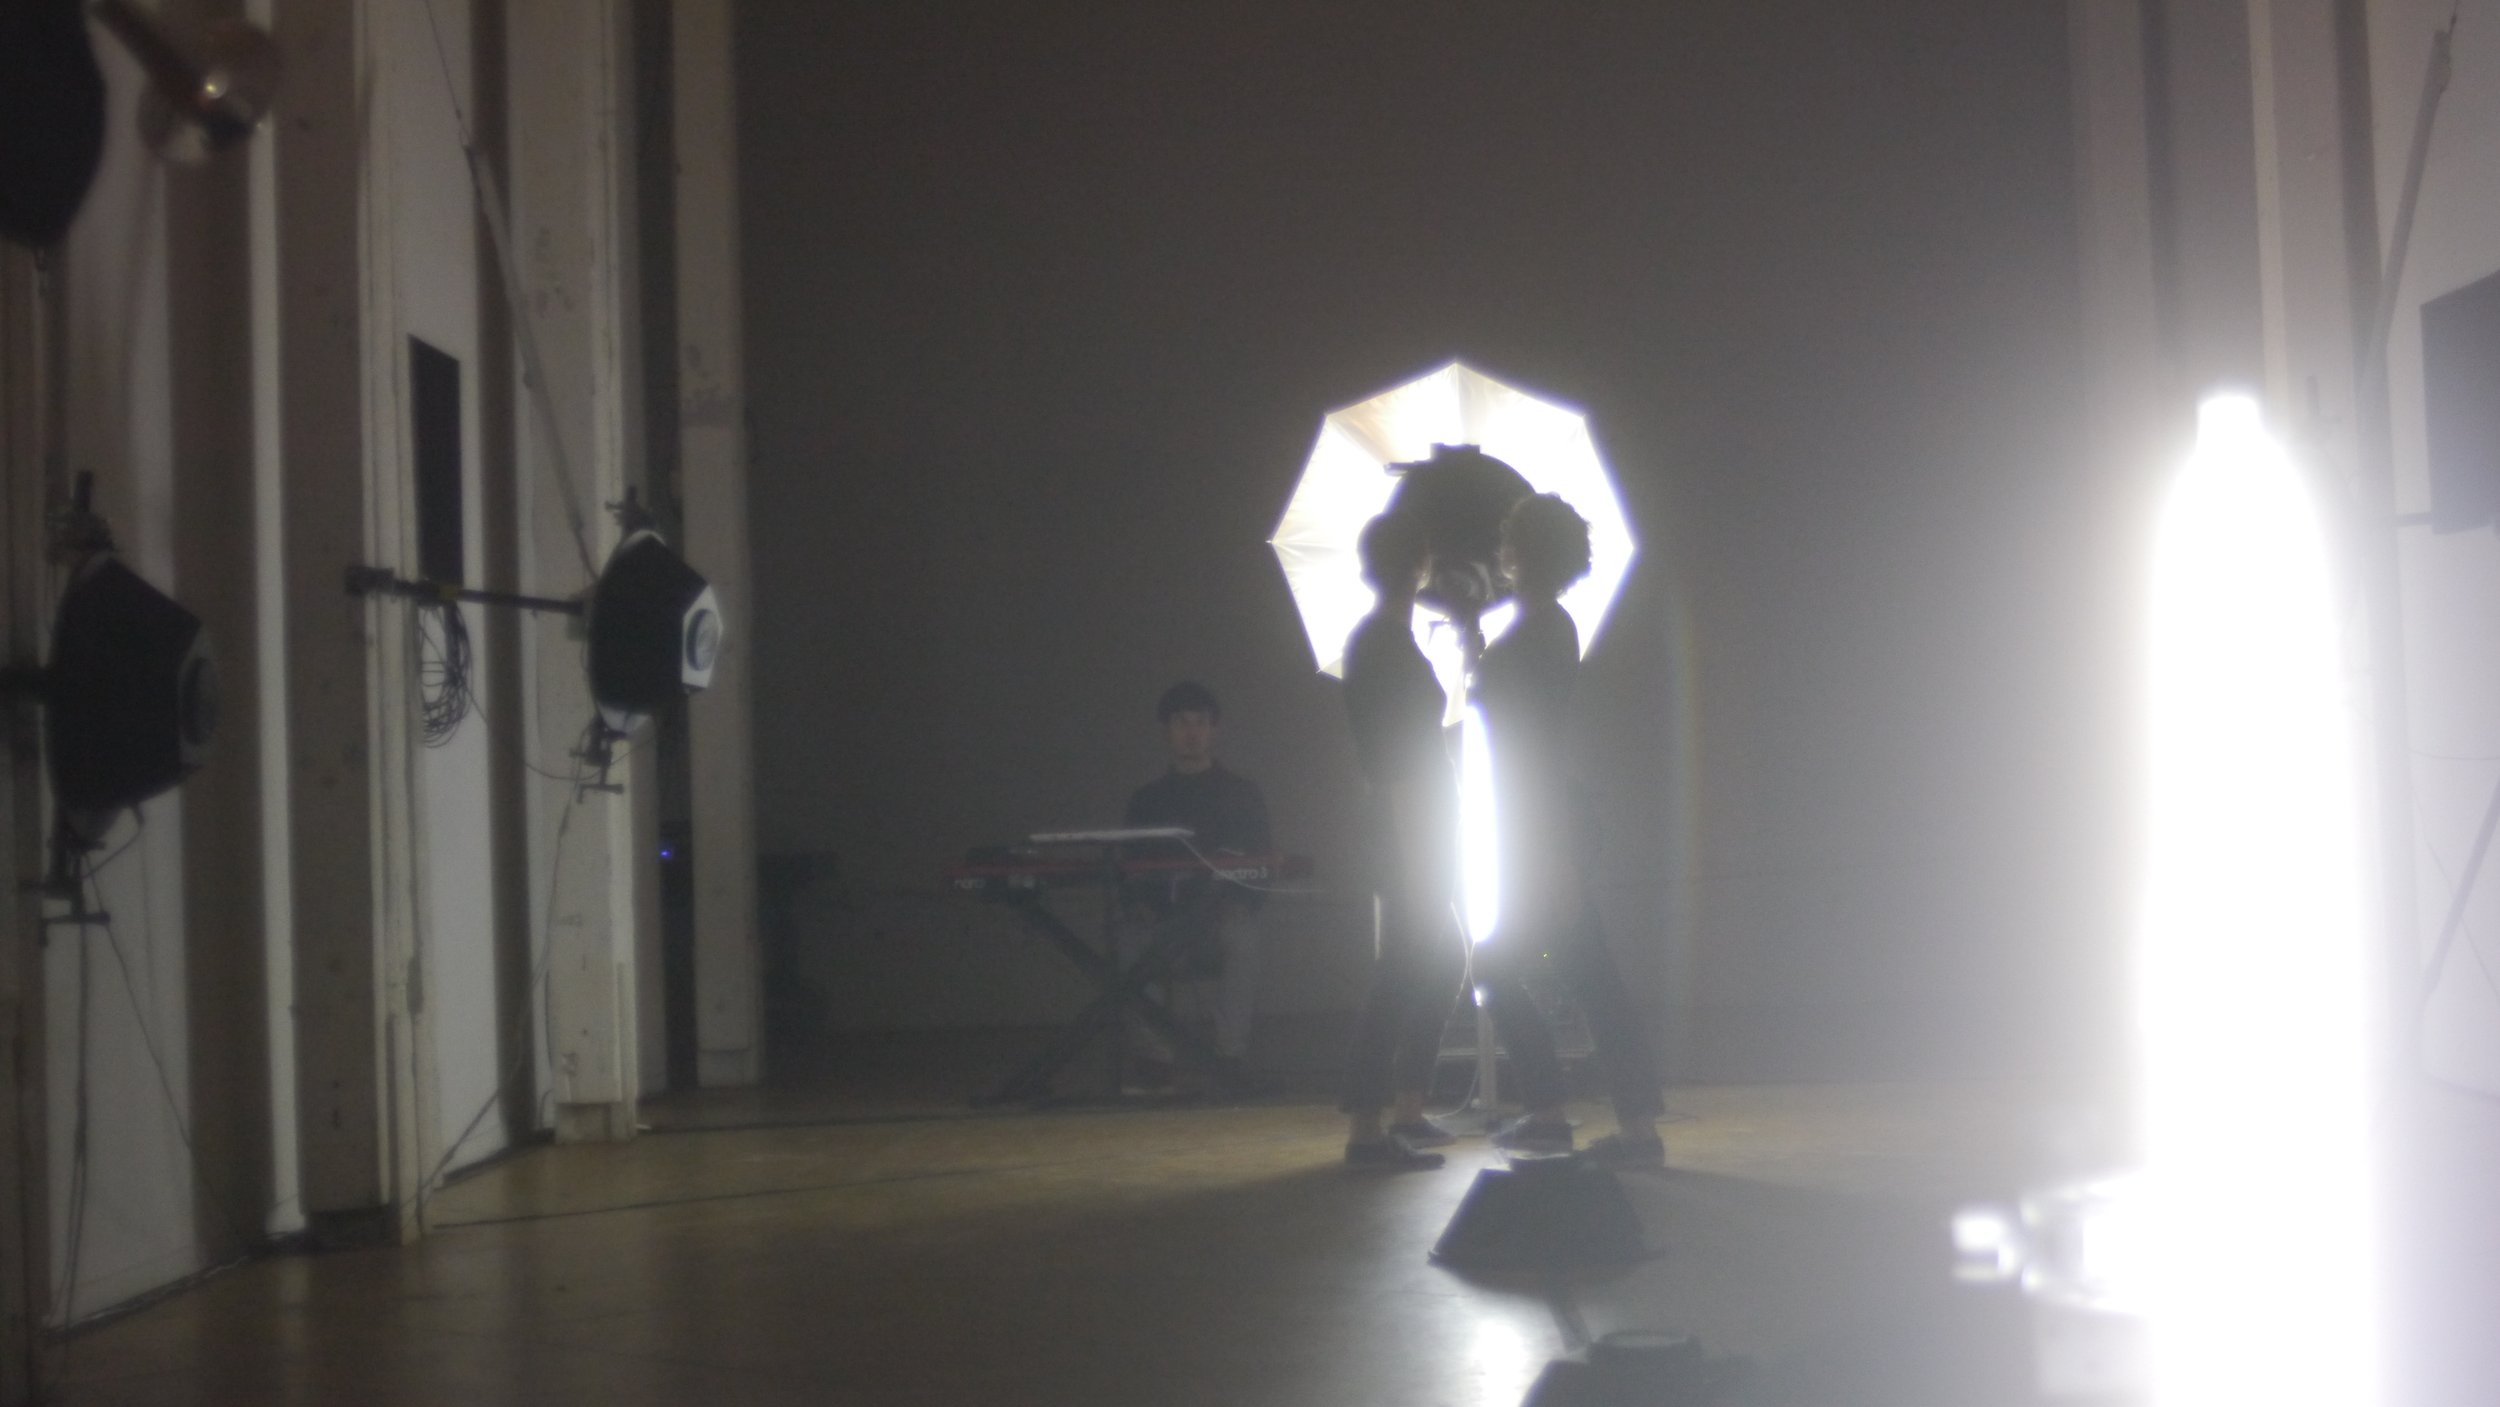 Two performers stand in front of a hemisphere speaker backlit by an umbrella light. A keyboardist sits nearby in a narrow hall. Photo by John Preston Gomez.